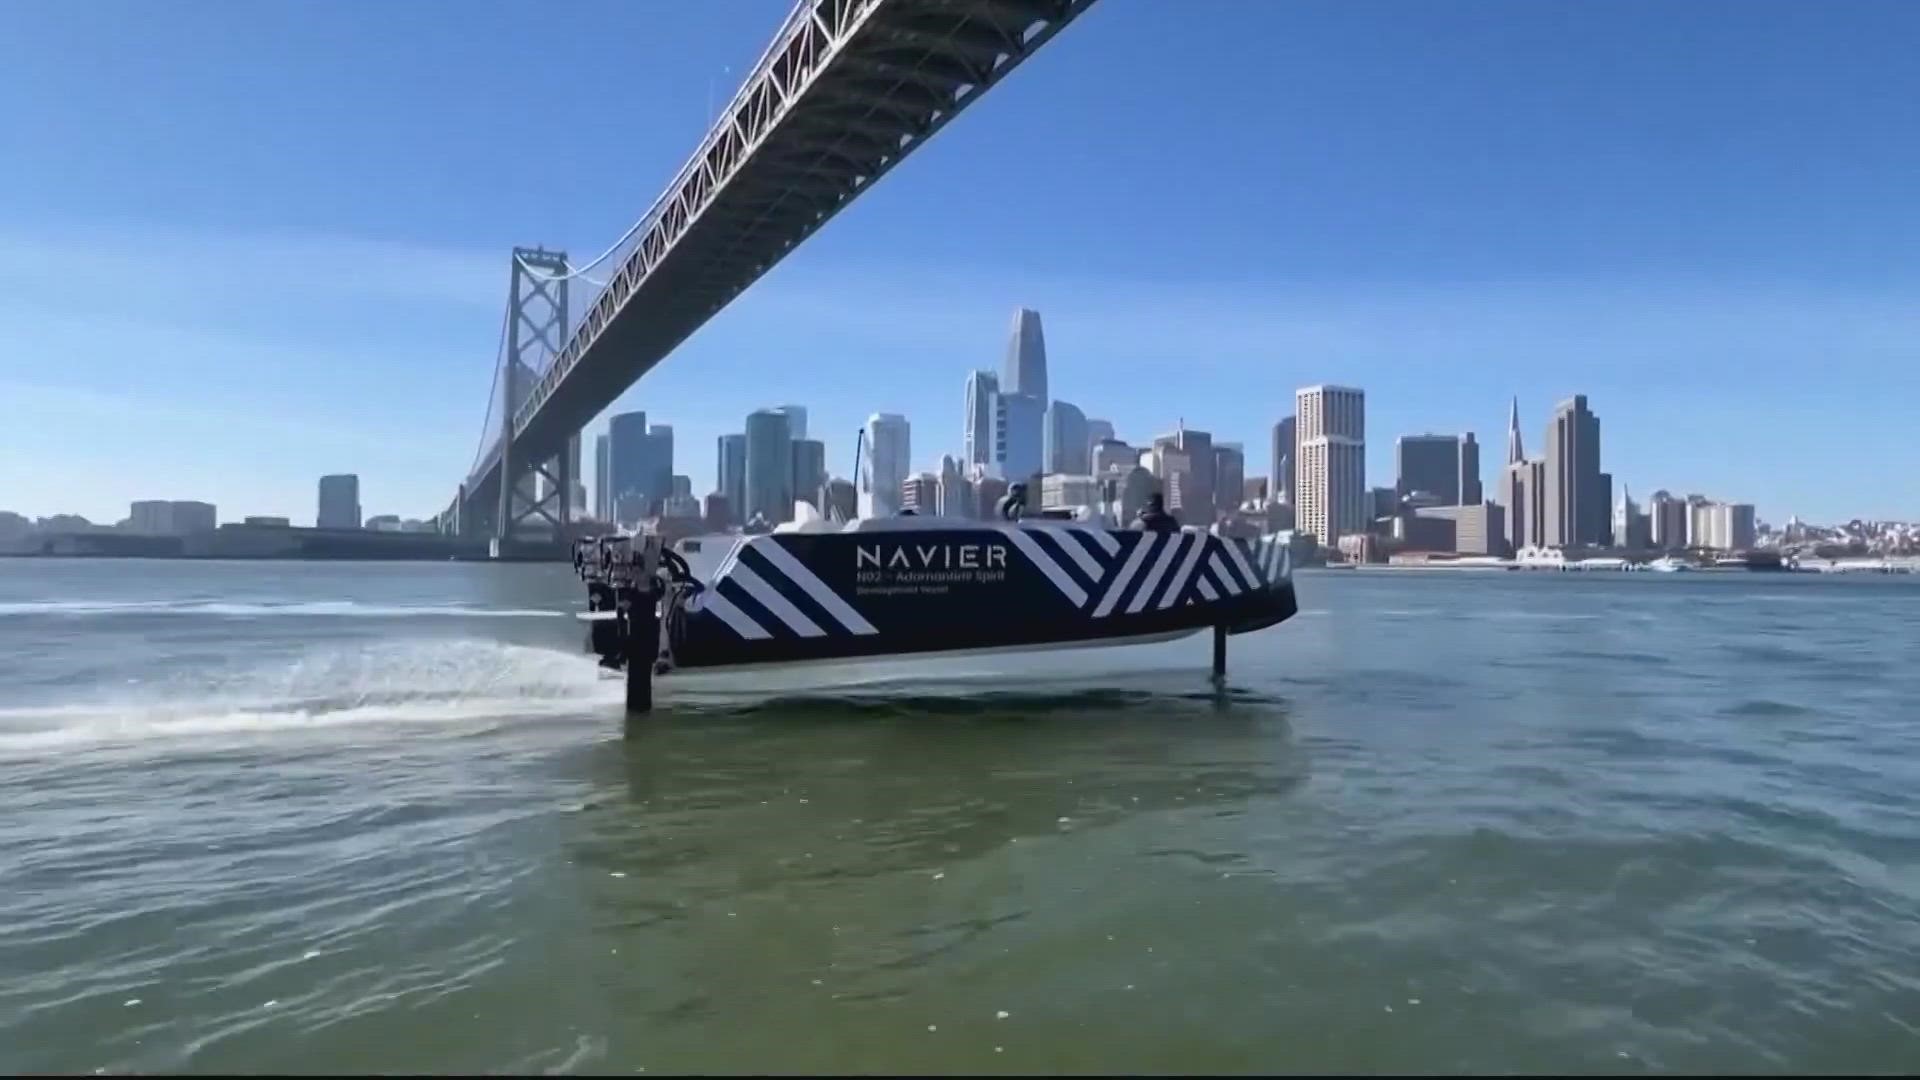 Officials claim besides its environmental benefits, the boat keeps passengers from getting motion sick because it stays above the water/waves.